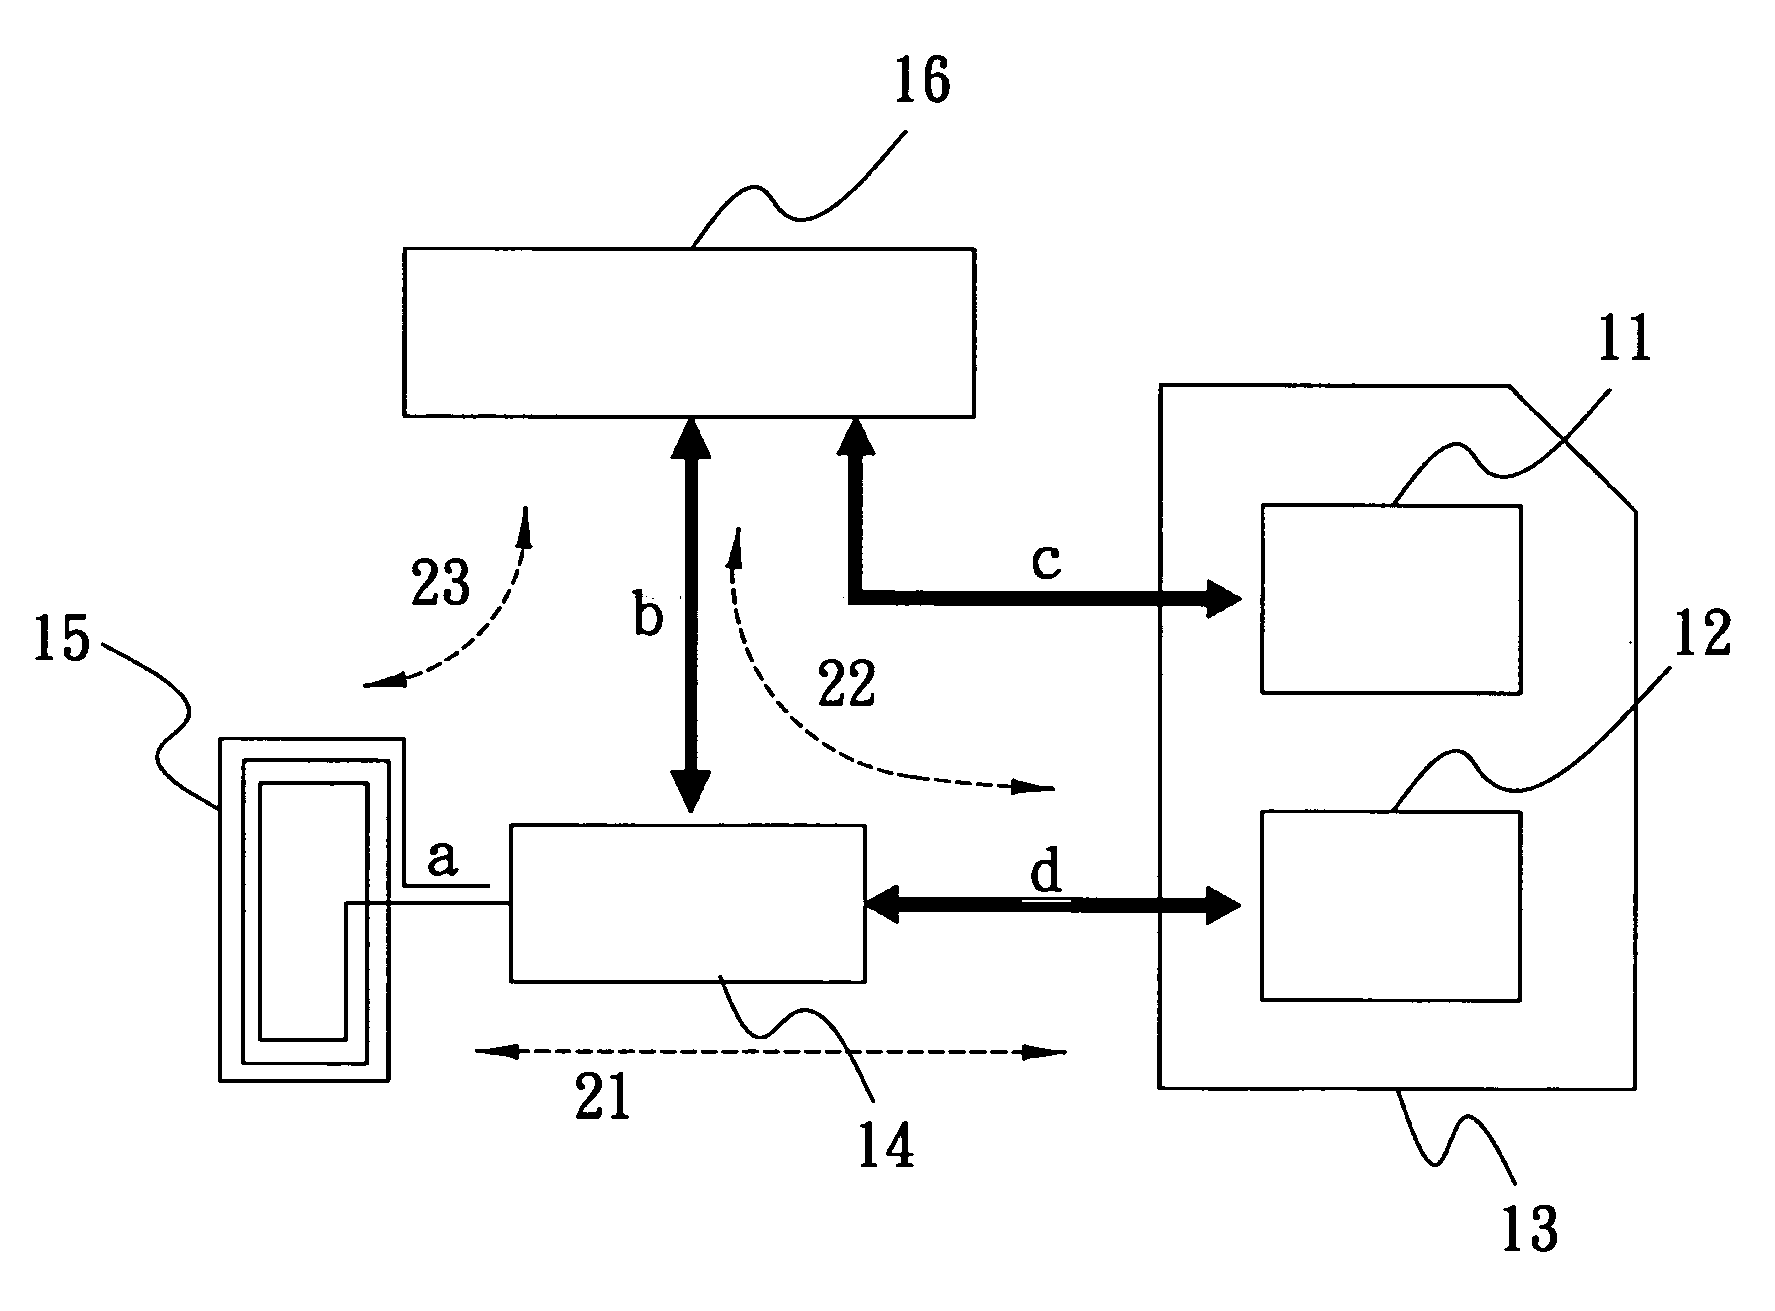 Combi-SIM card framework of electronic purse combining non-contacting transceiver of mobile device